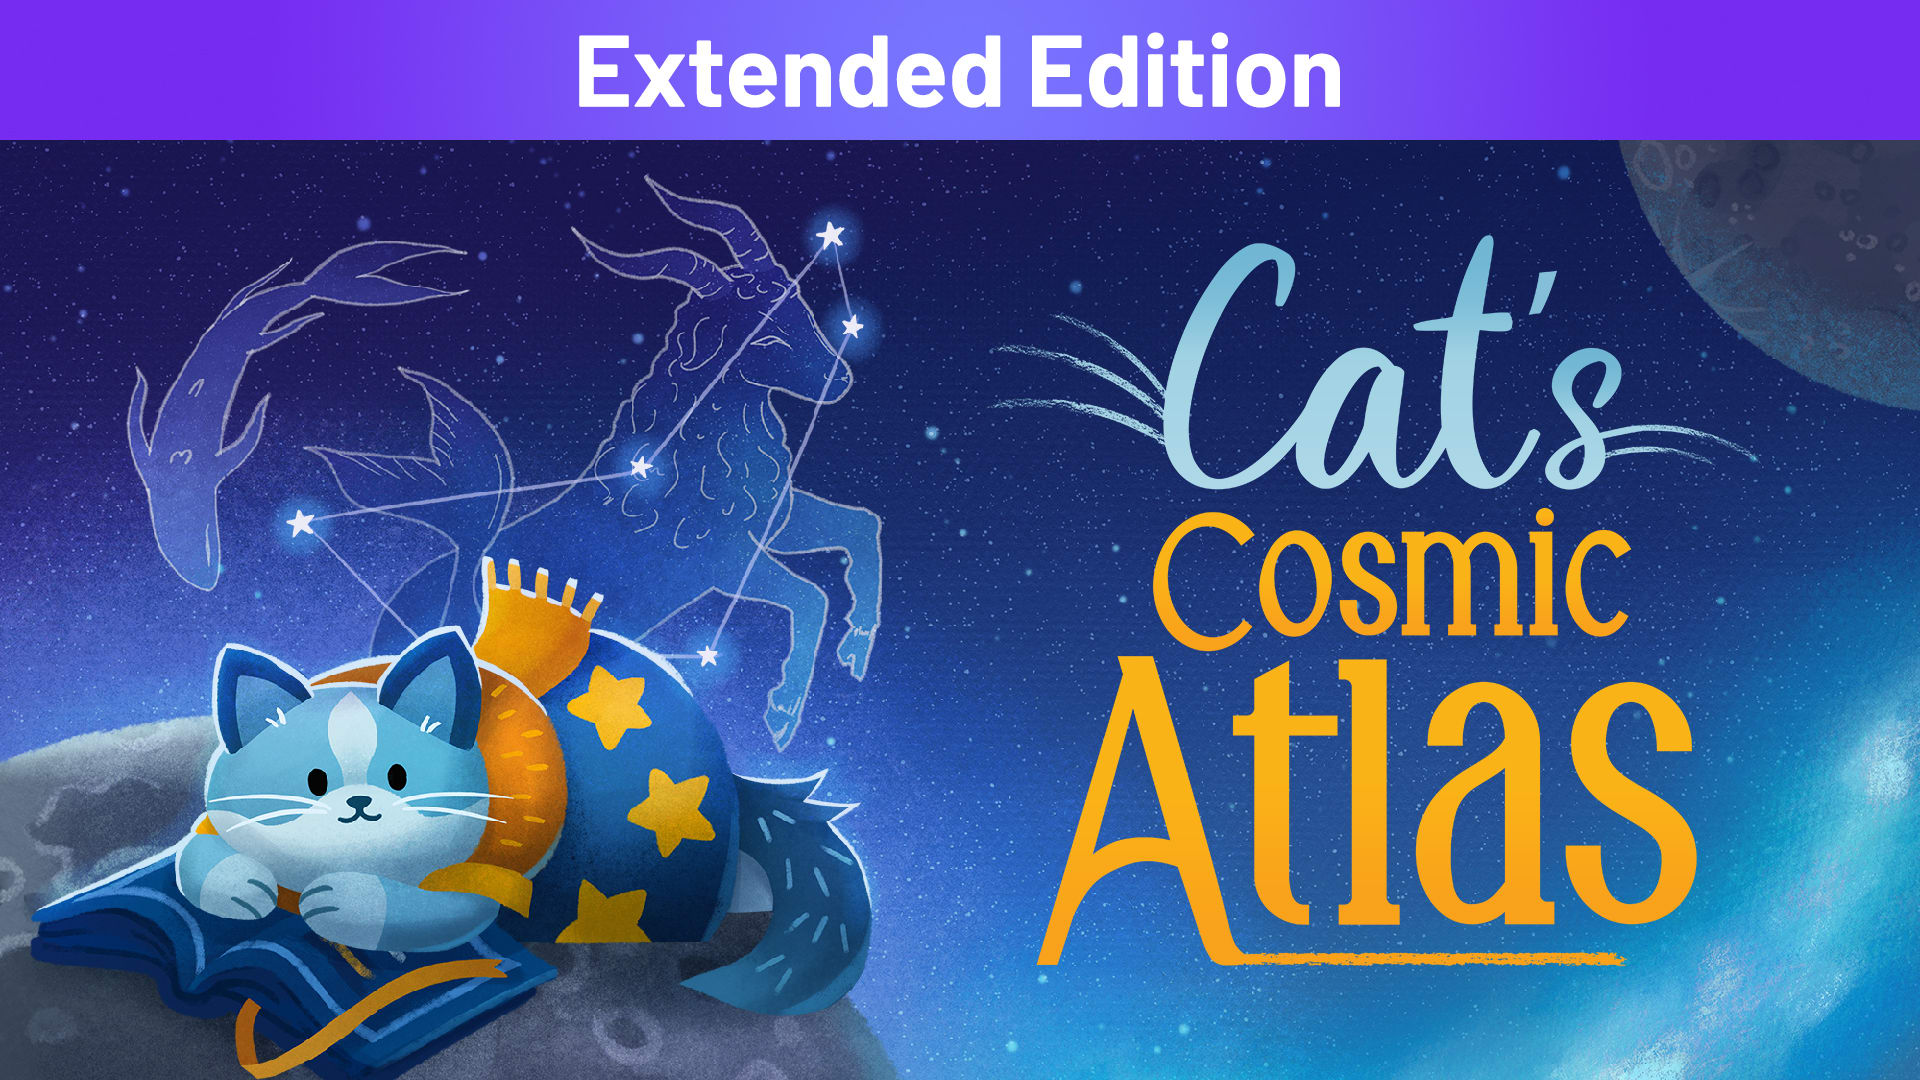 Cat's Cosmic Atlas Extended Edition